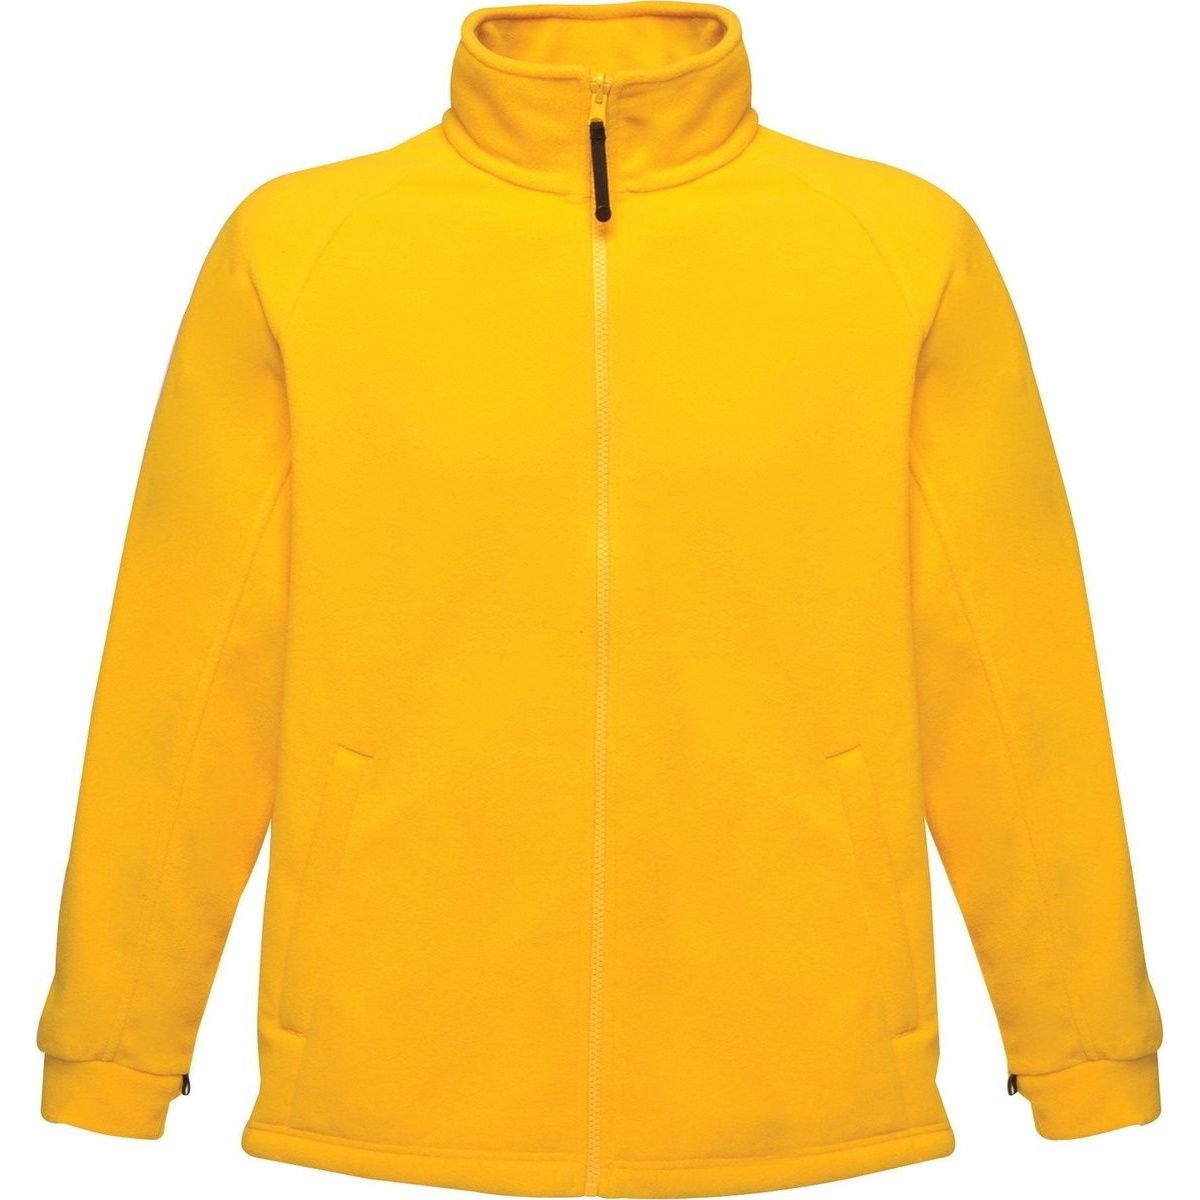 100% Polyester. Fleece cuffs. Adjustable shockcord hem. Interactive - ideal to be worn with:. Gibson jacket see. Vertex jacket see. 2 zipped lower pockets. Symmetry Fleece - lighter weight/greater warmth. Also available in ladies sizes, code TRF541. Also available in childrens size, code TRF542. Weight: 280g/m. Fabric: 280 series anti-pill Symmetry fleece. XS (36: To Fit (ins)). S (38: To Fit (ins)). M (40: To Fit (ins)). L (42: To Fit (ins)). XL (44: To Fit (ins)). 2XL (47: To Fit (ins)). 3XL (50: To Fit (ins)). 4XL (53: To Fit (ins)).  A comprehensive range of promotional and corporate clothing suitable for the great outdoors, at surprisingly competitive prices.